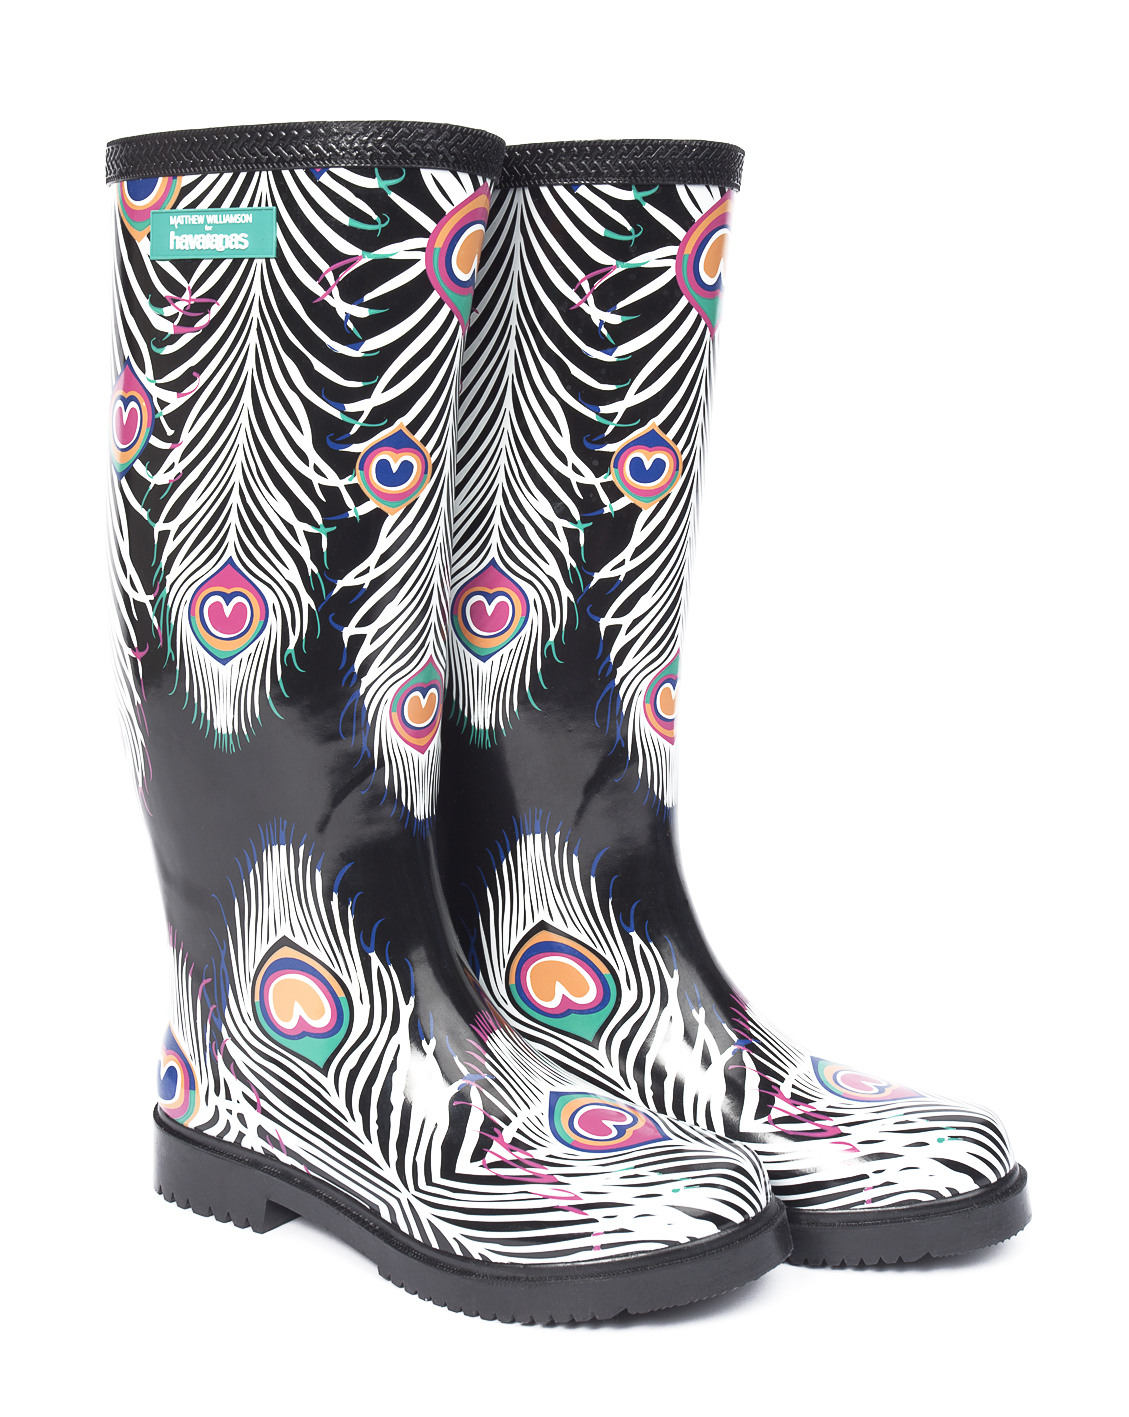 Wellies, Williamson and Havaianas | The Arbuturian